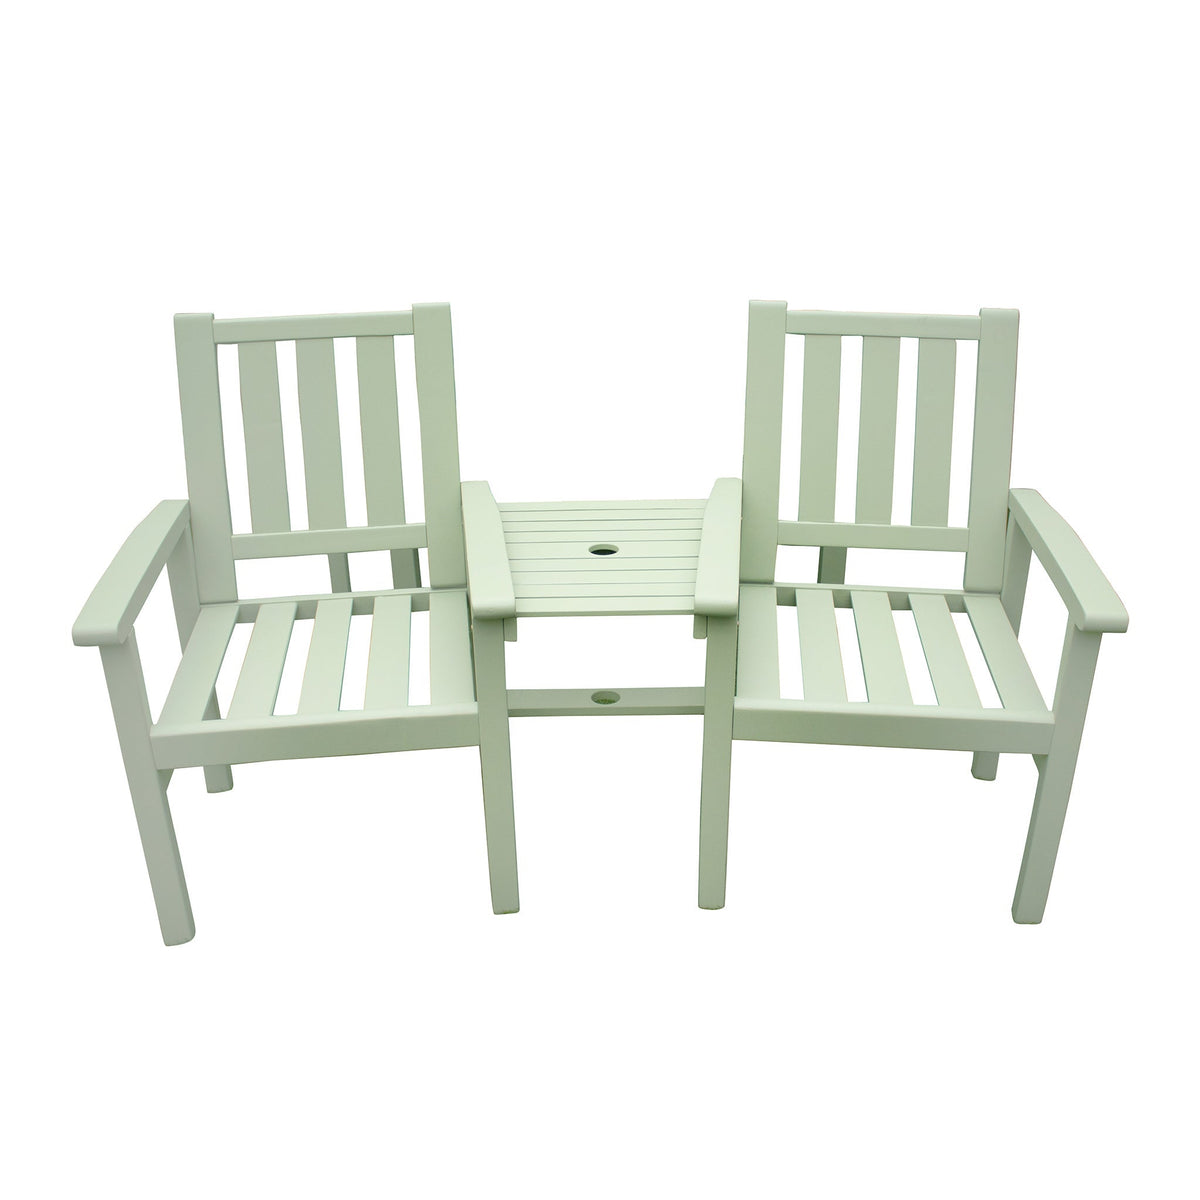 Porto Green Companion Wooden Love Seat from Roseland Home Furniture